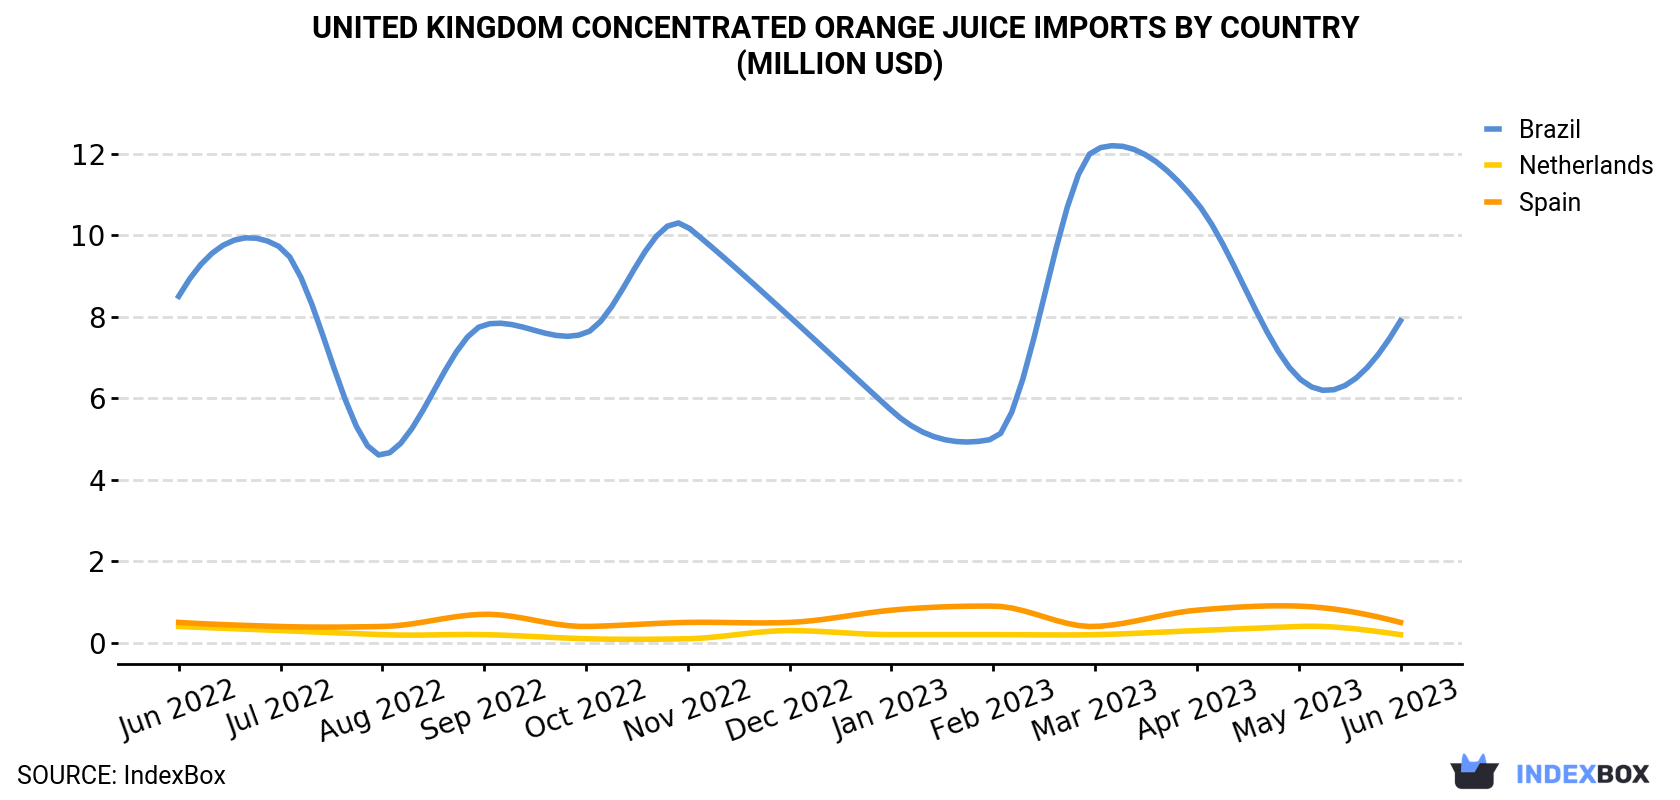 United Kingdom Concentrated Orange Juice Imports By Country (Million USD)